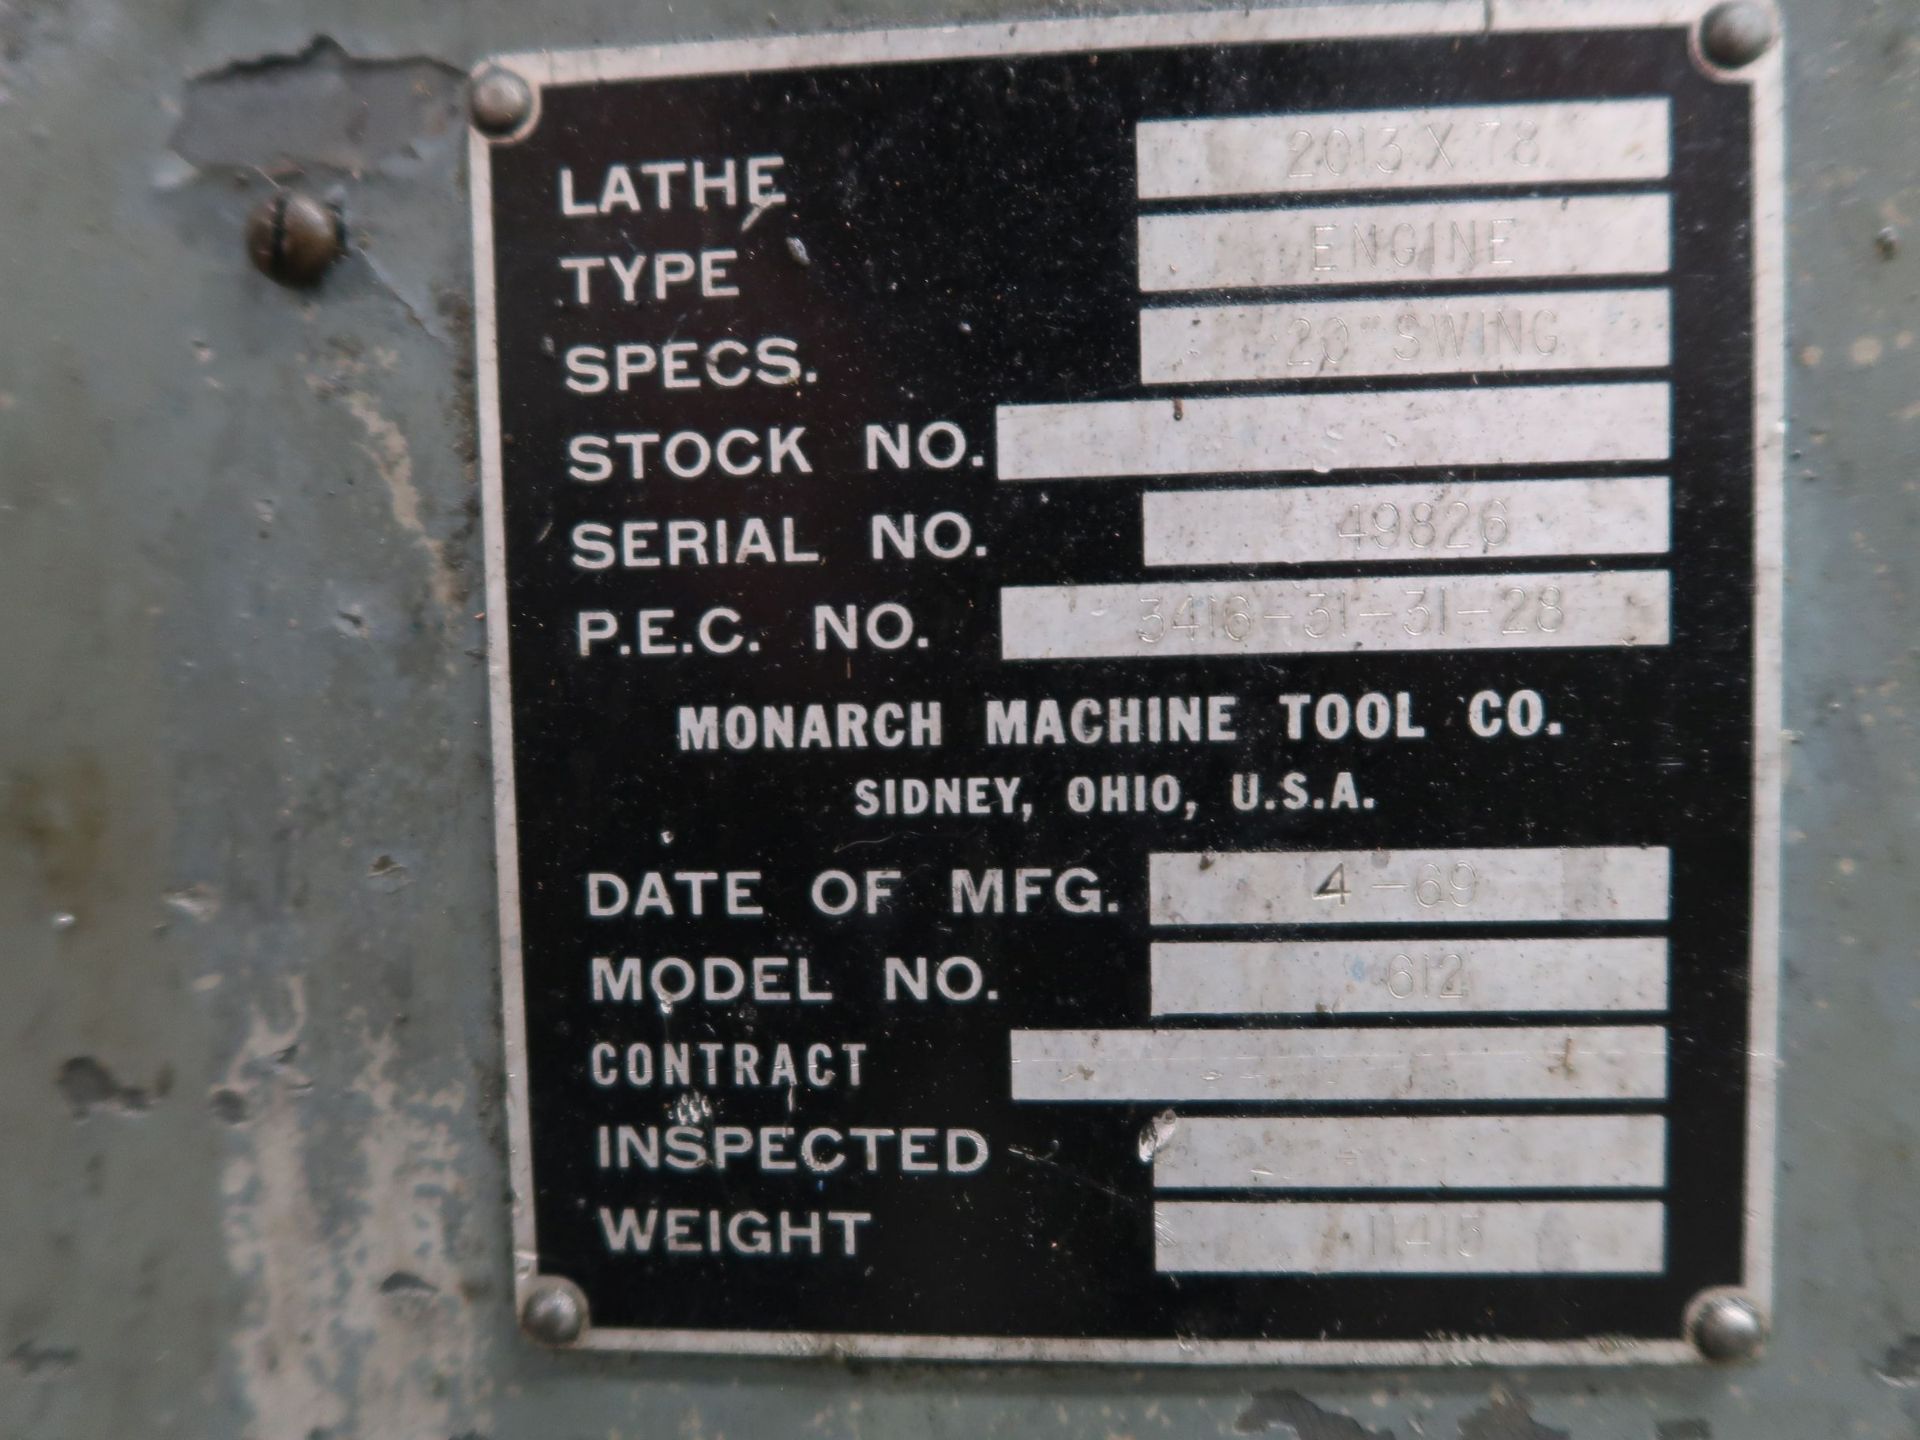 20" X 78" MONARCH 2013X78 GEARED HEAD ENGINE LATHE; S/N 49826, SPINDLE SPEED 12-1,500, 15" 4-JAW - Image 12 of 12